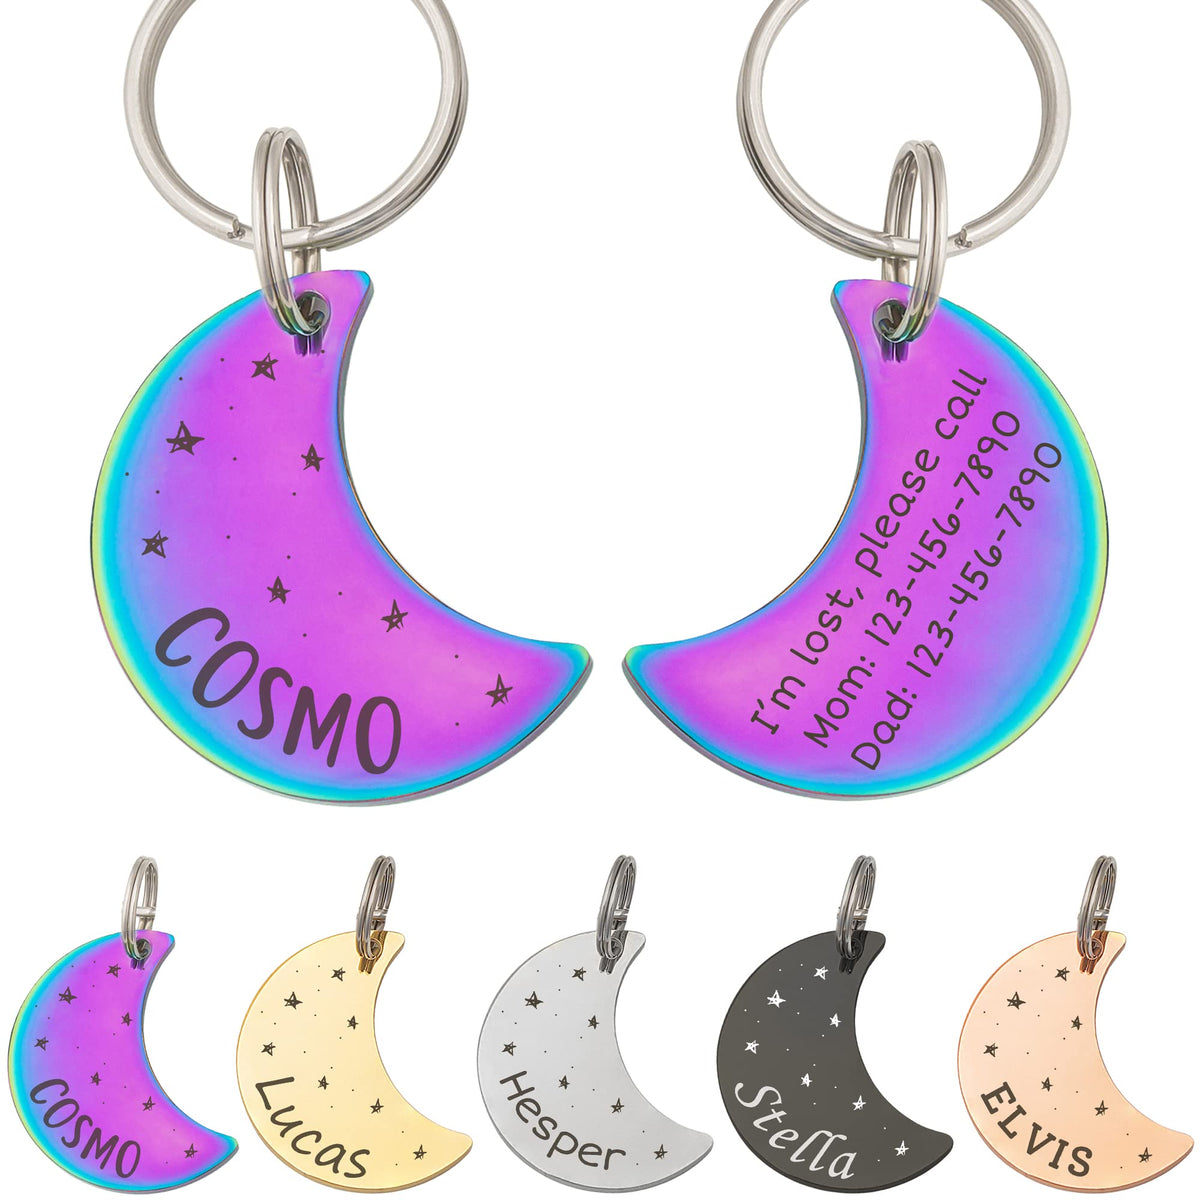 Anavia Starry Sky Theme Pet ID Tags in Half Moon & Star Shape, Personalized Dog Name Tag Cat Tag, Glossy Stainless Steel Gold Plated Black Rainbow Dog Collar Tag (Small, Moon Shape, Rainbow)